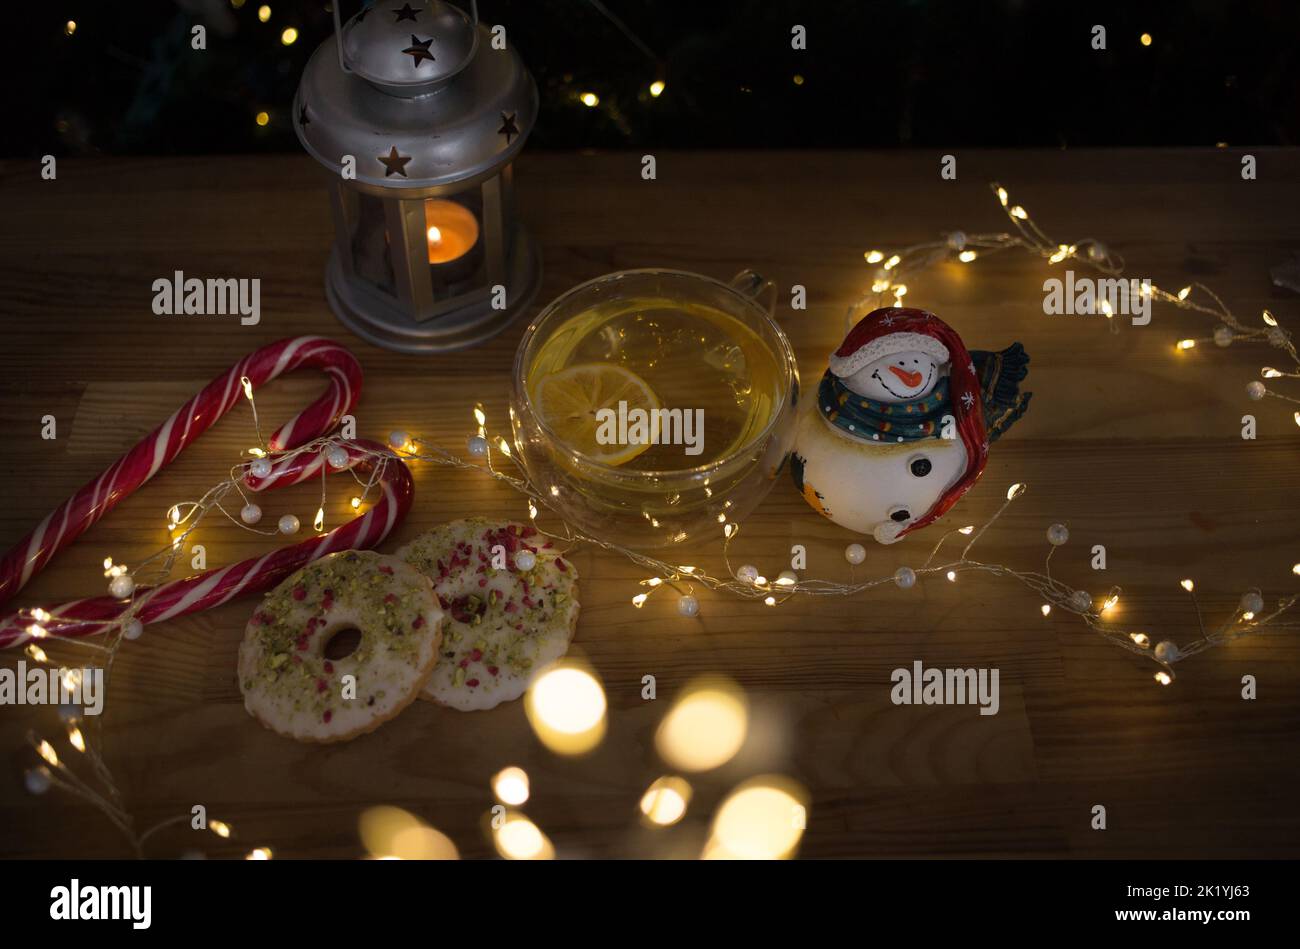 Cozy atmospheric photo of Christmas theme. transparent cups with tea and lemon slices, souvenir snowman, cookies, glowing garland lights, lollipops, b Stock Photo